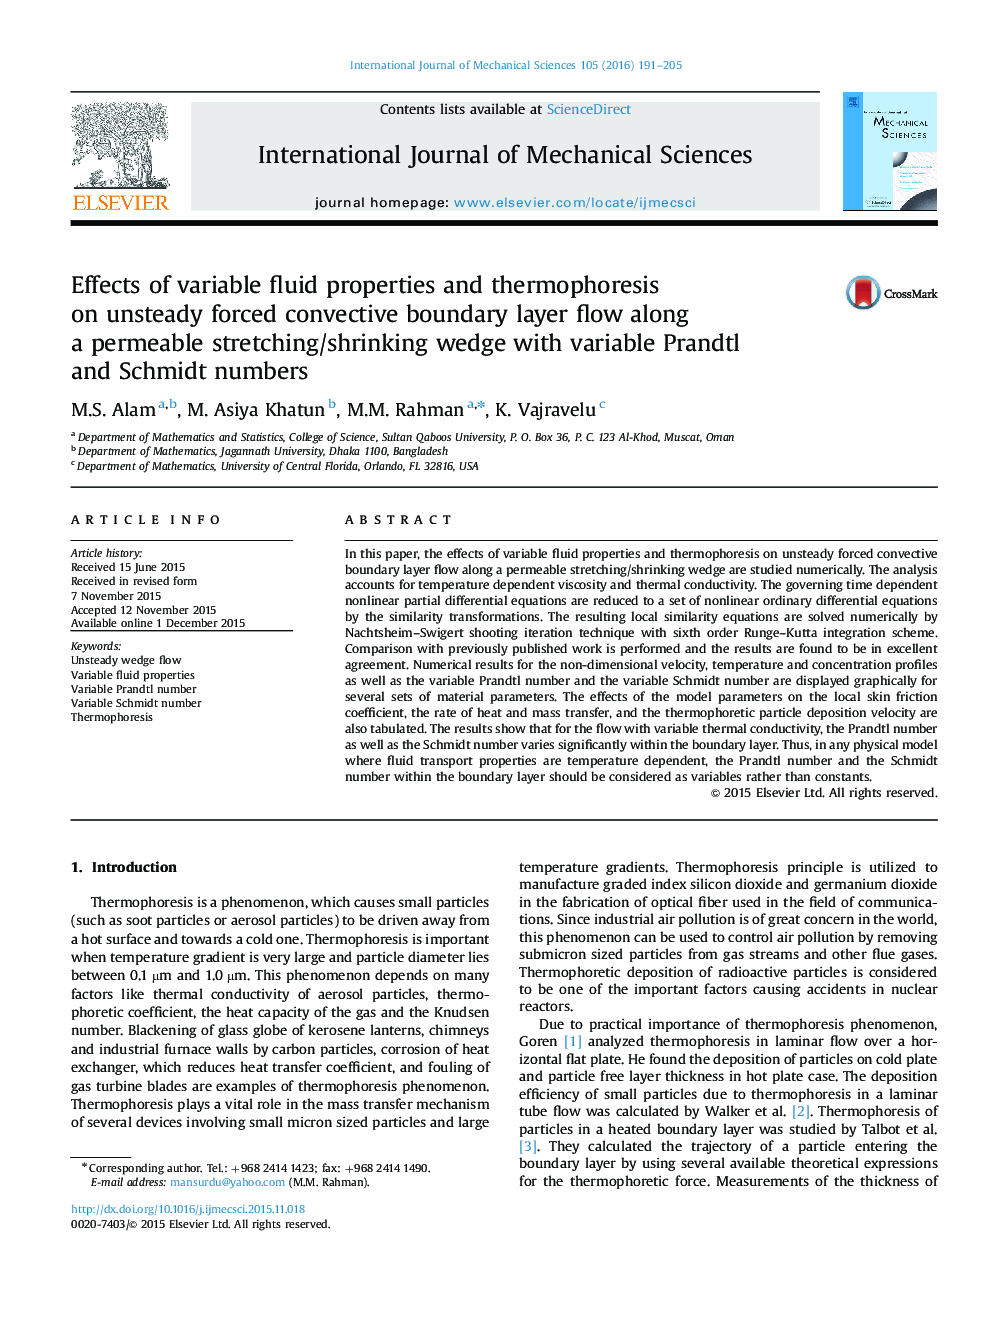 Effects of variable fluid properties and thermophoresis on unsteady forced convective boundary layer flow along a permeable stretching/shrinking wedge with variable Prandtl and Schmidt numbers